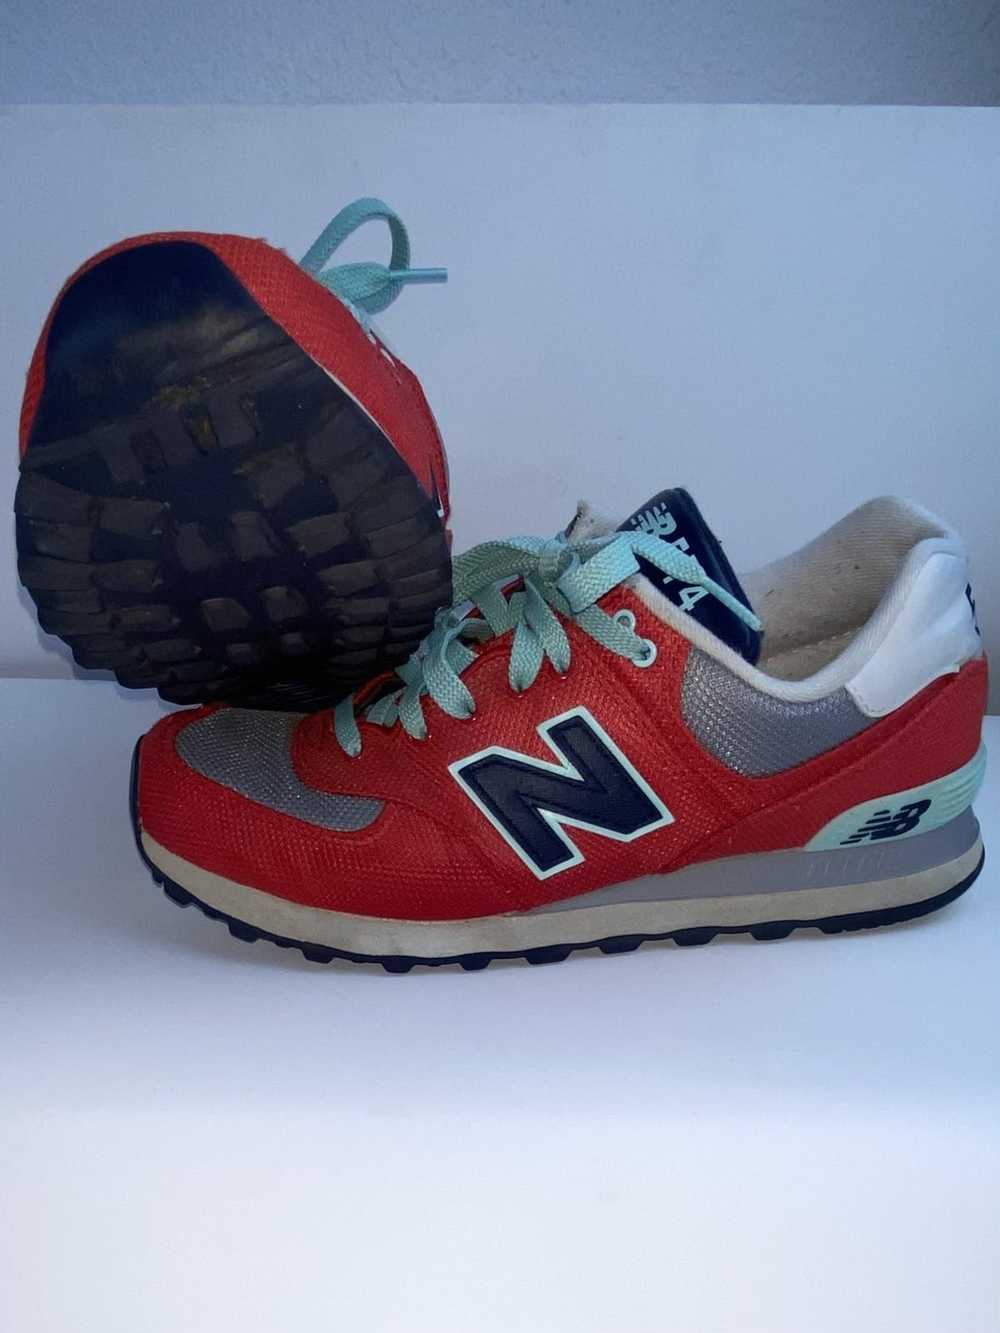 New Balance New Balance 574 Econ red teal shoes - image 2